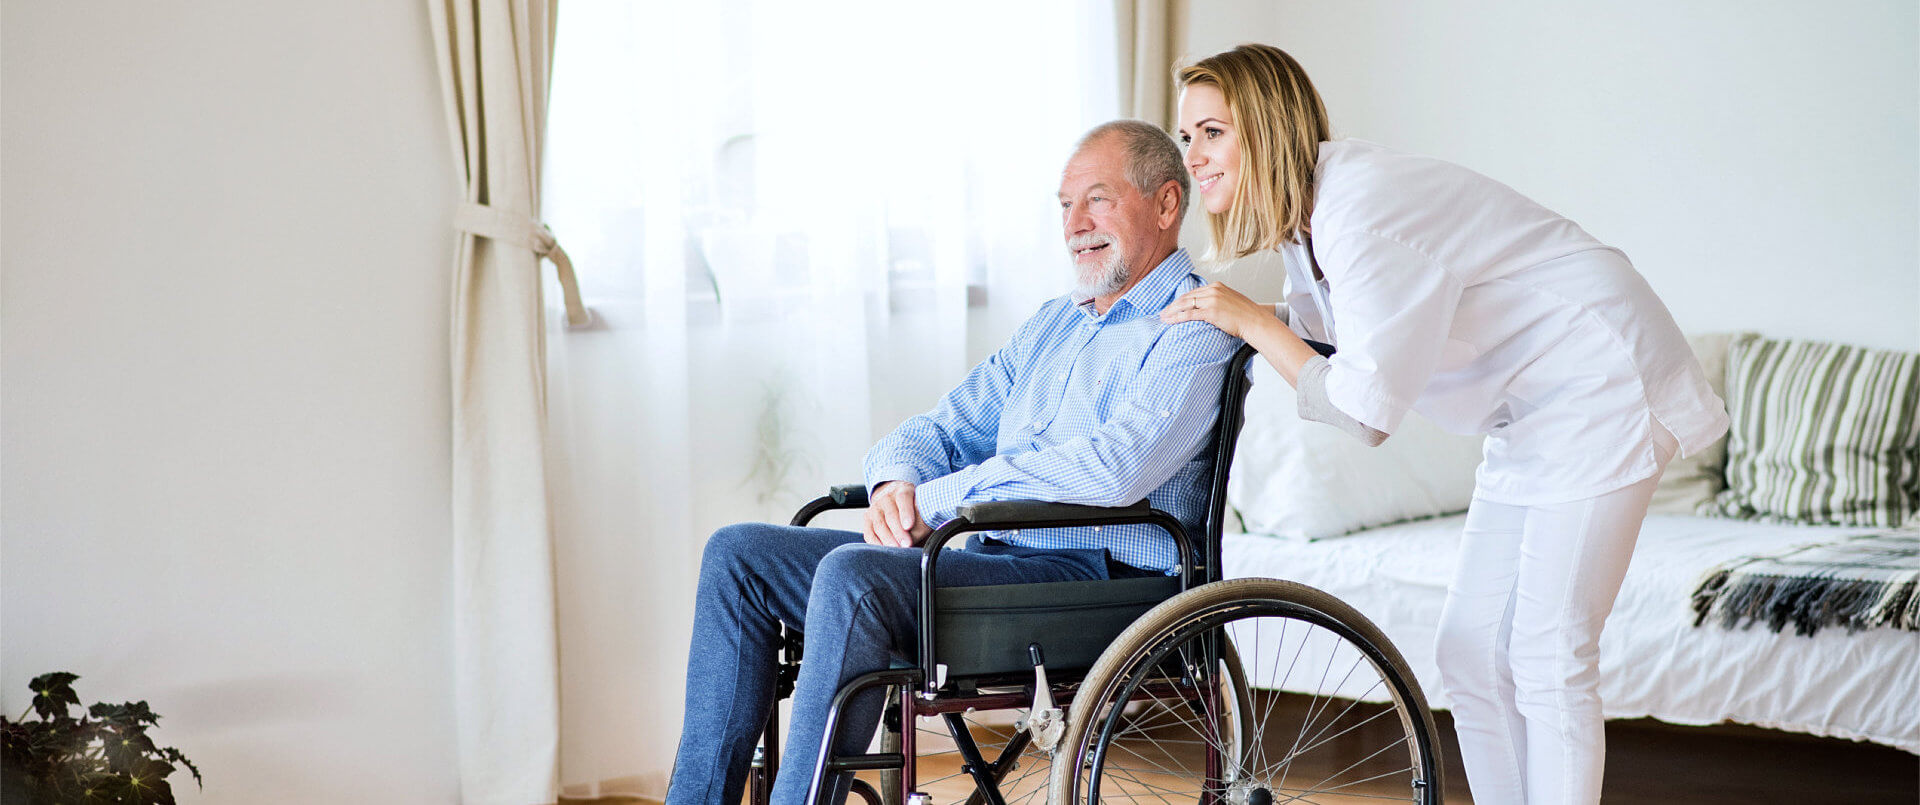 caregiver and senior man on wheel chair looking outside